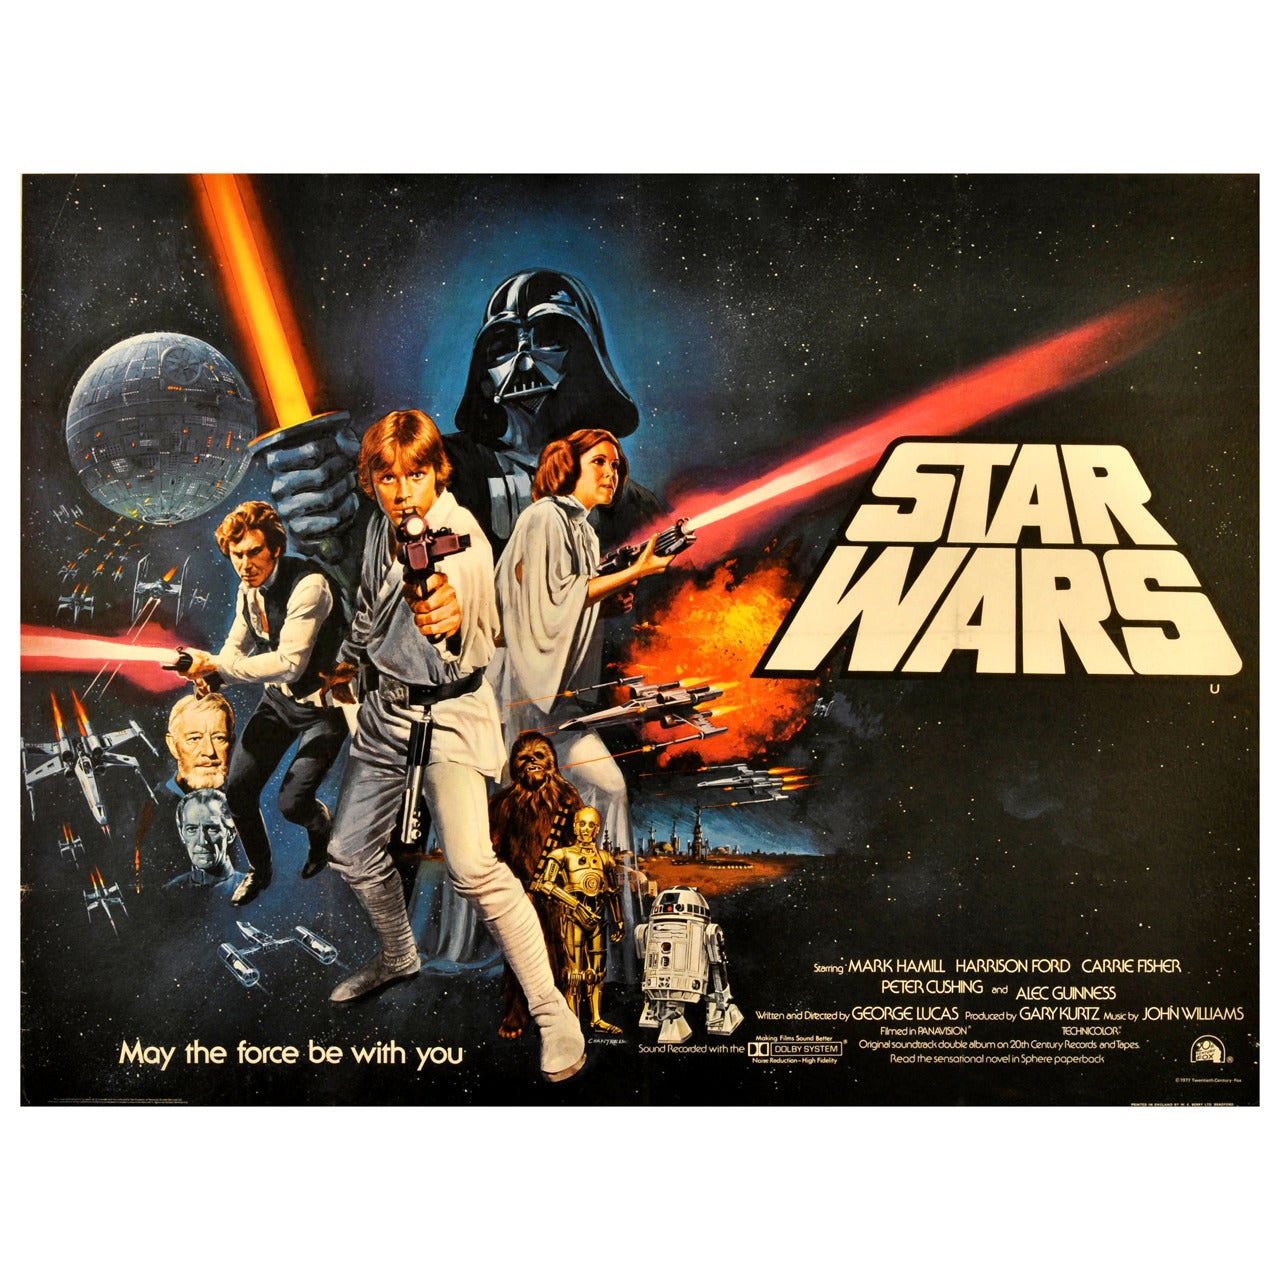 Original and rare first release movie poster for George Lucas' Star Wars saga